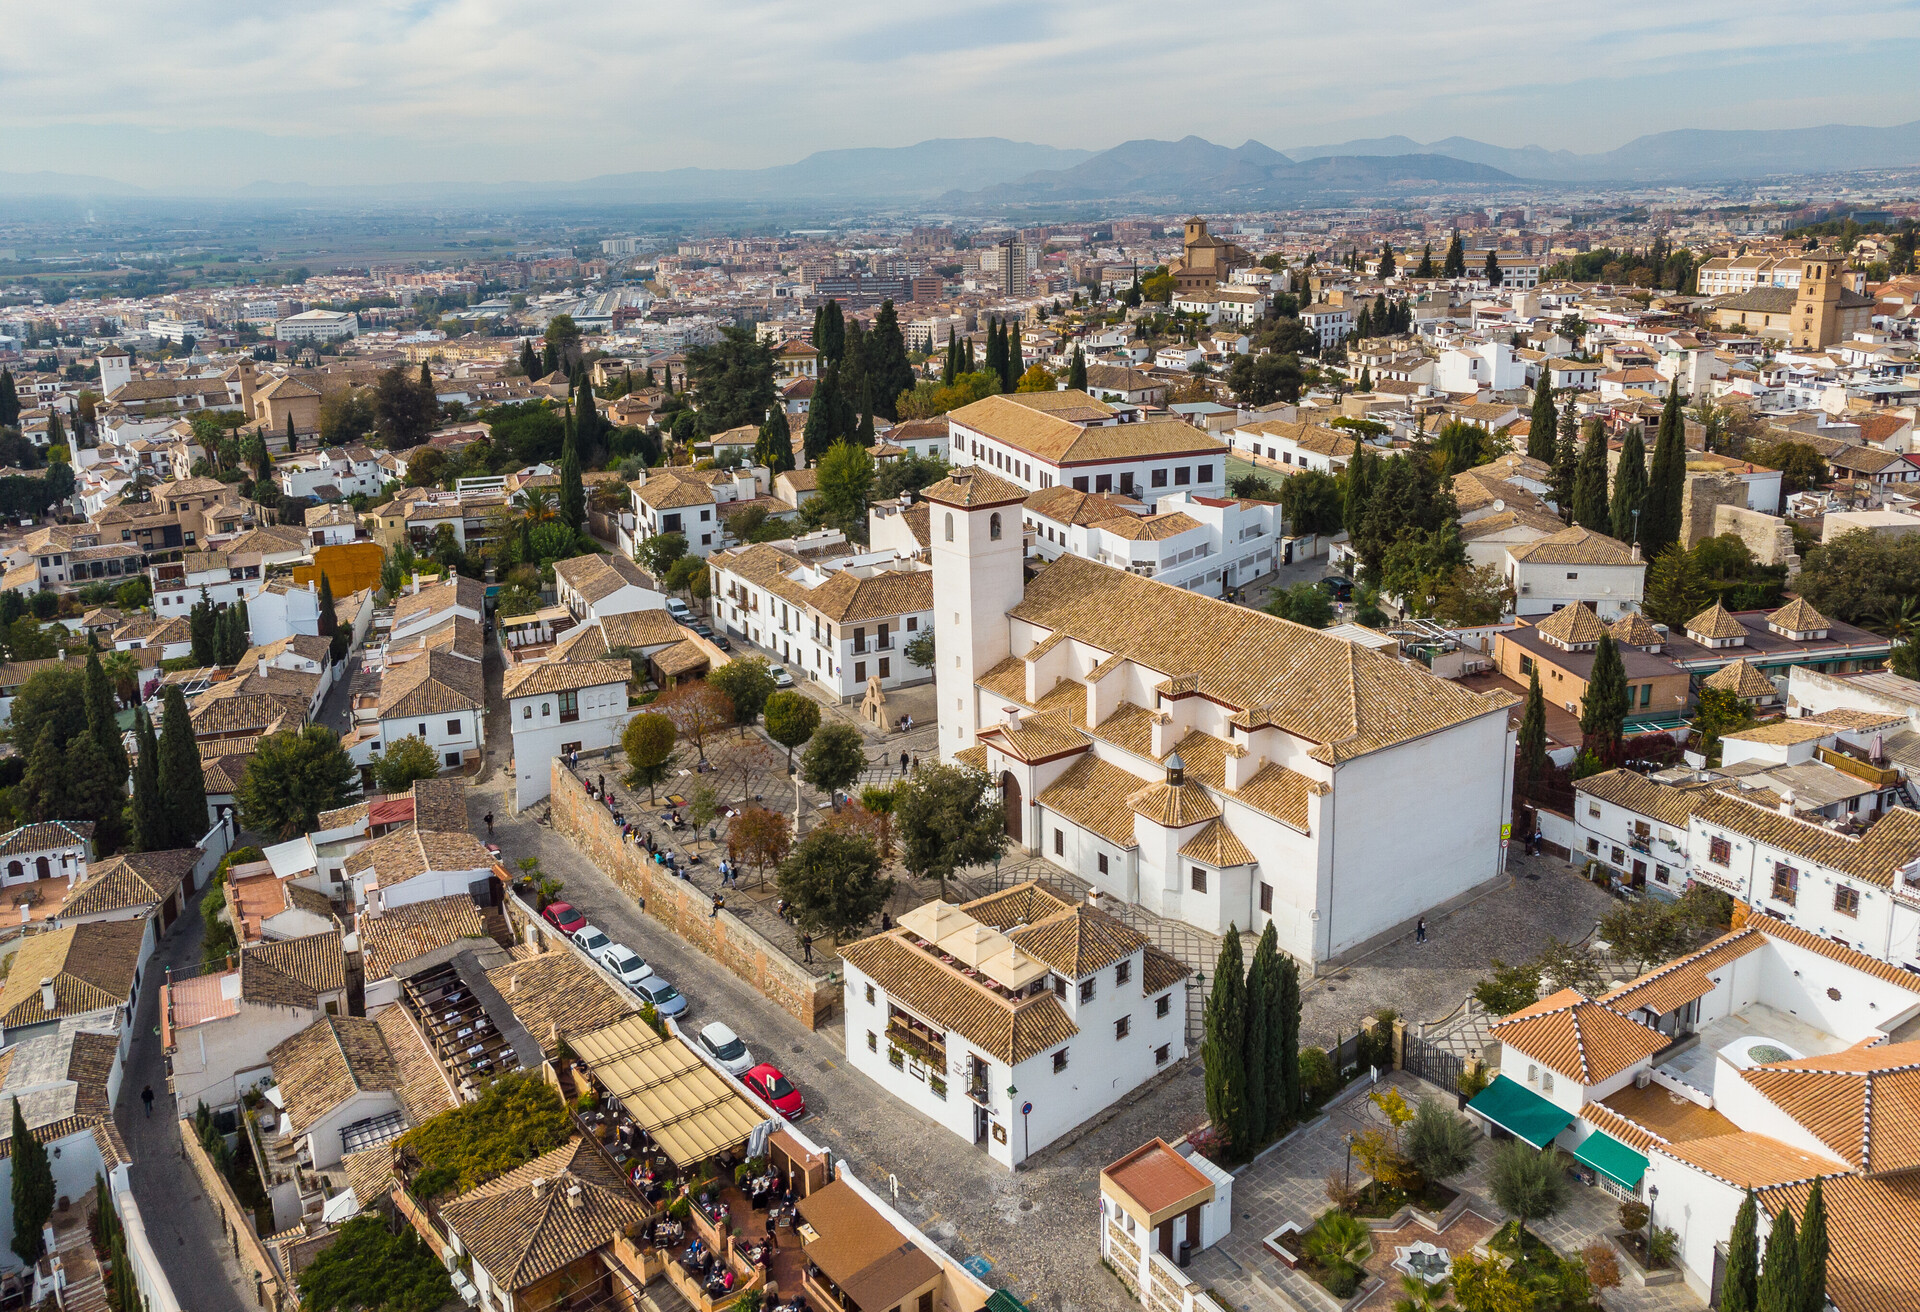 Aerial view of the famous  Mirador de San Nicolás church, a viewpoint on the Alhambra, in Granada old town in Andalusia in southern Spain